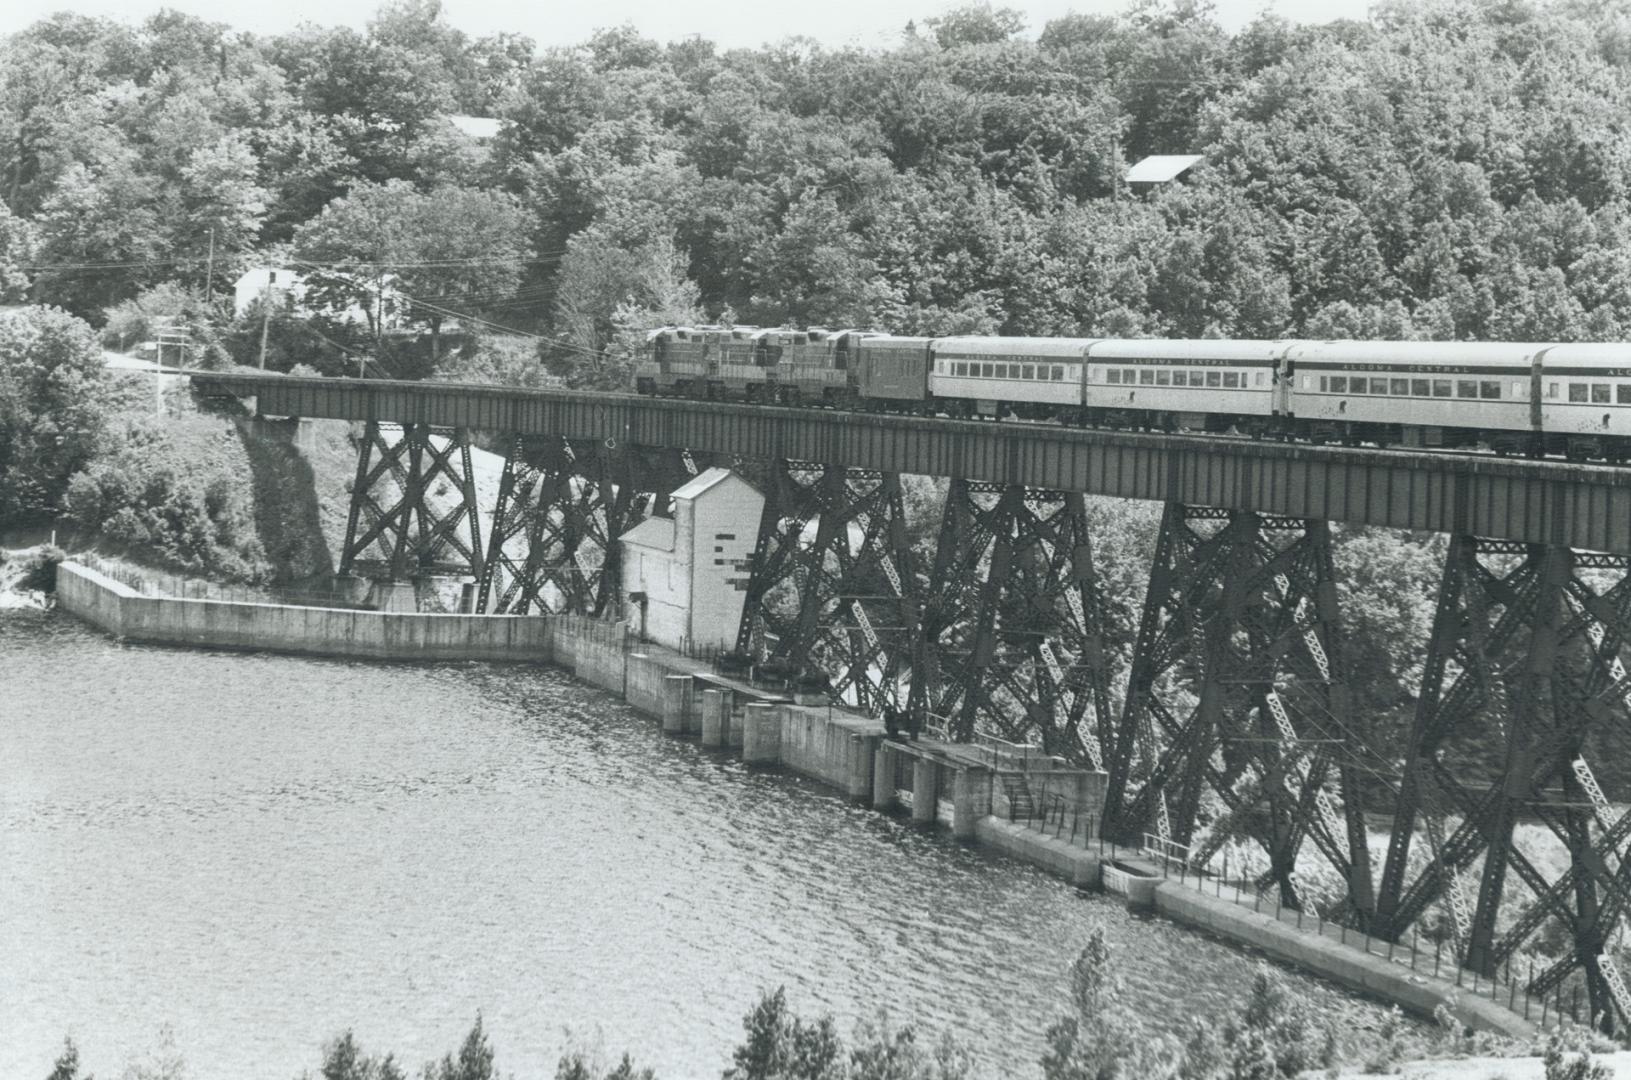 Railway tracks and trains winding through the Canyon and crossing the Montreal River